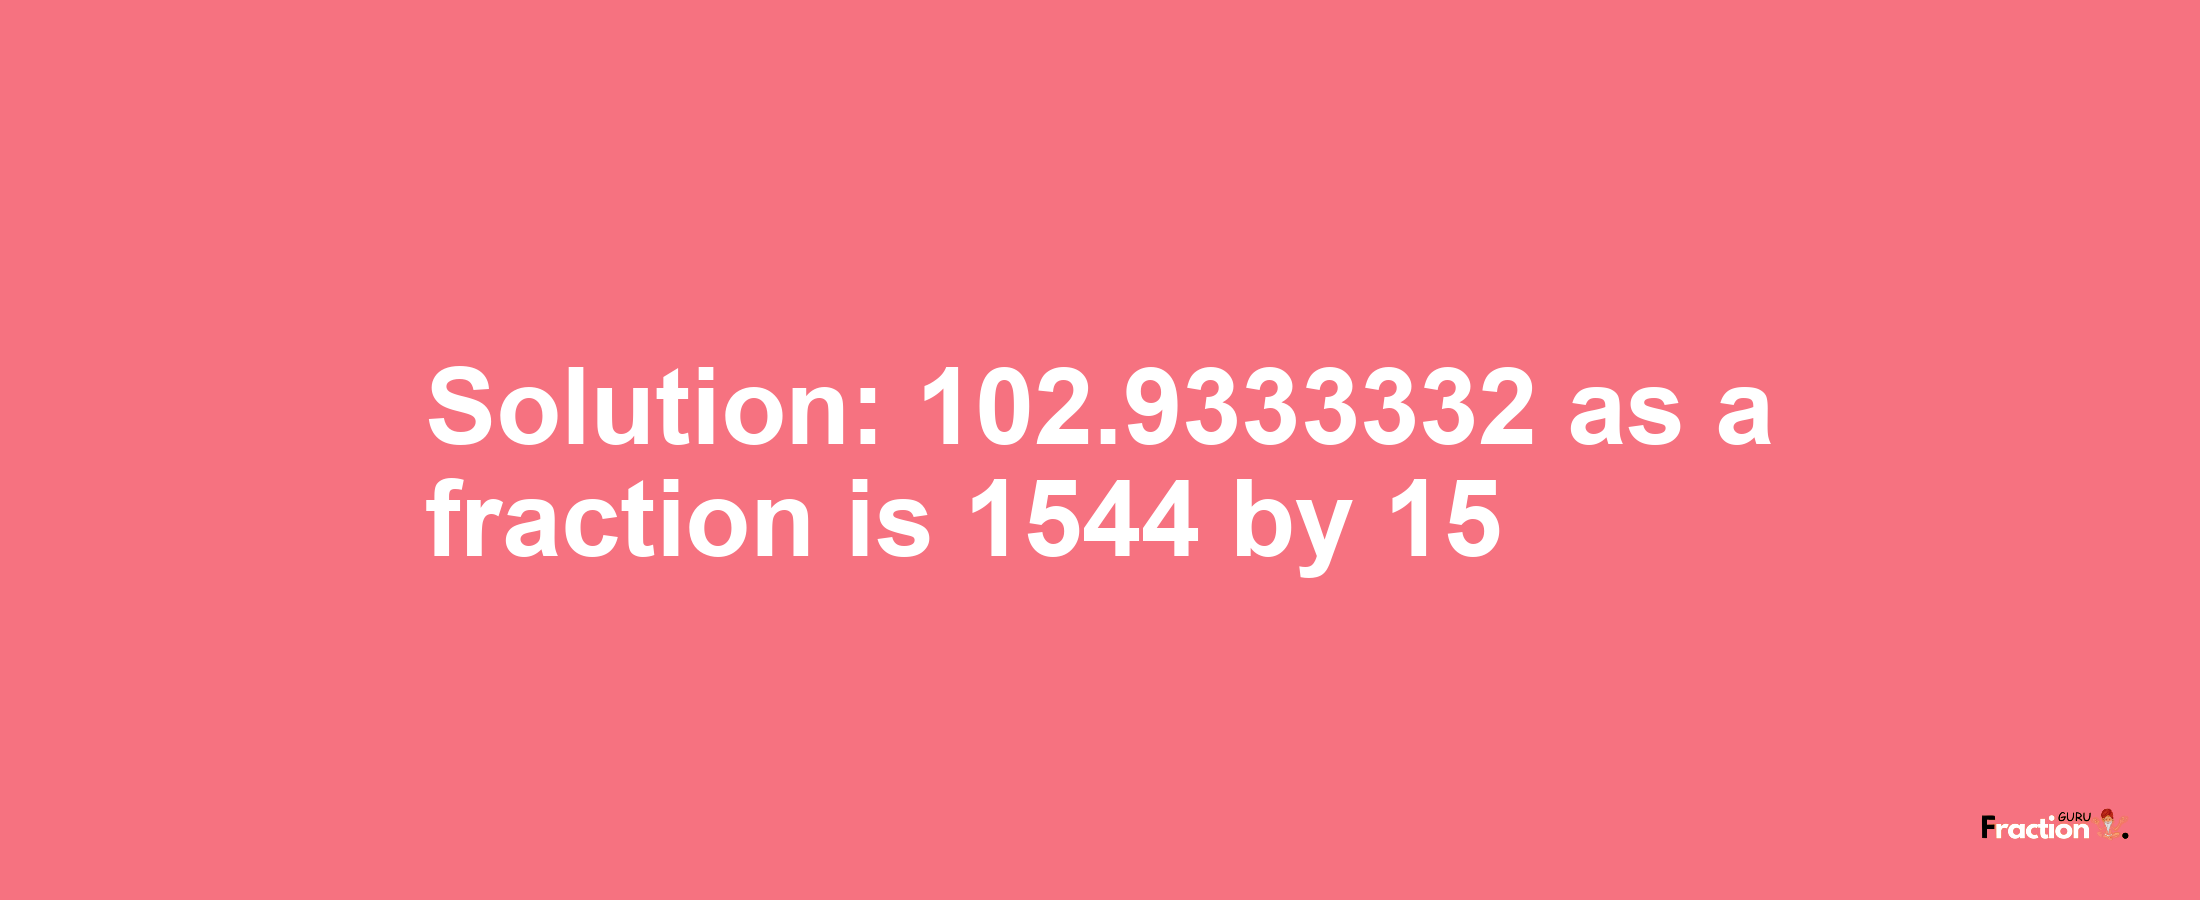 Solution:102.9333332 as a fraction is 1544/15